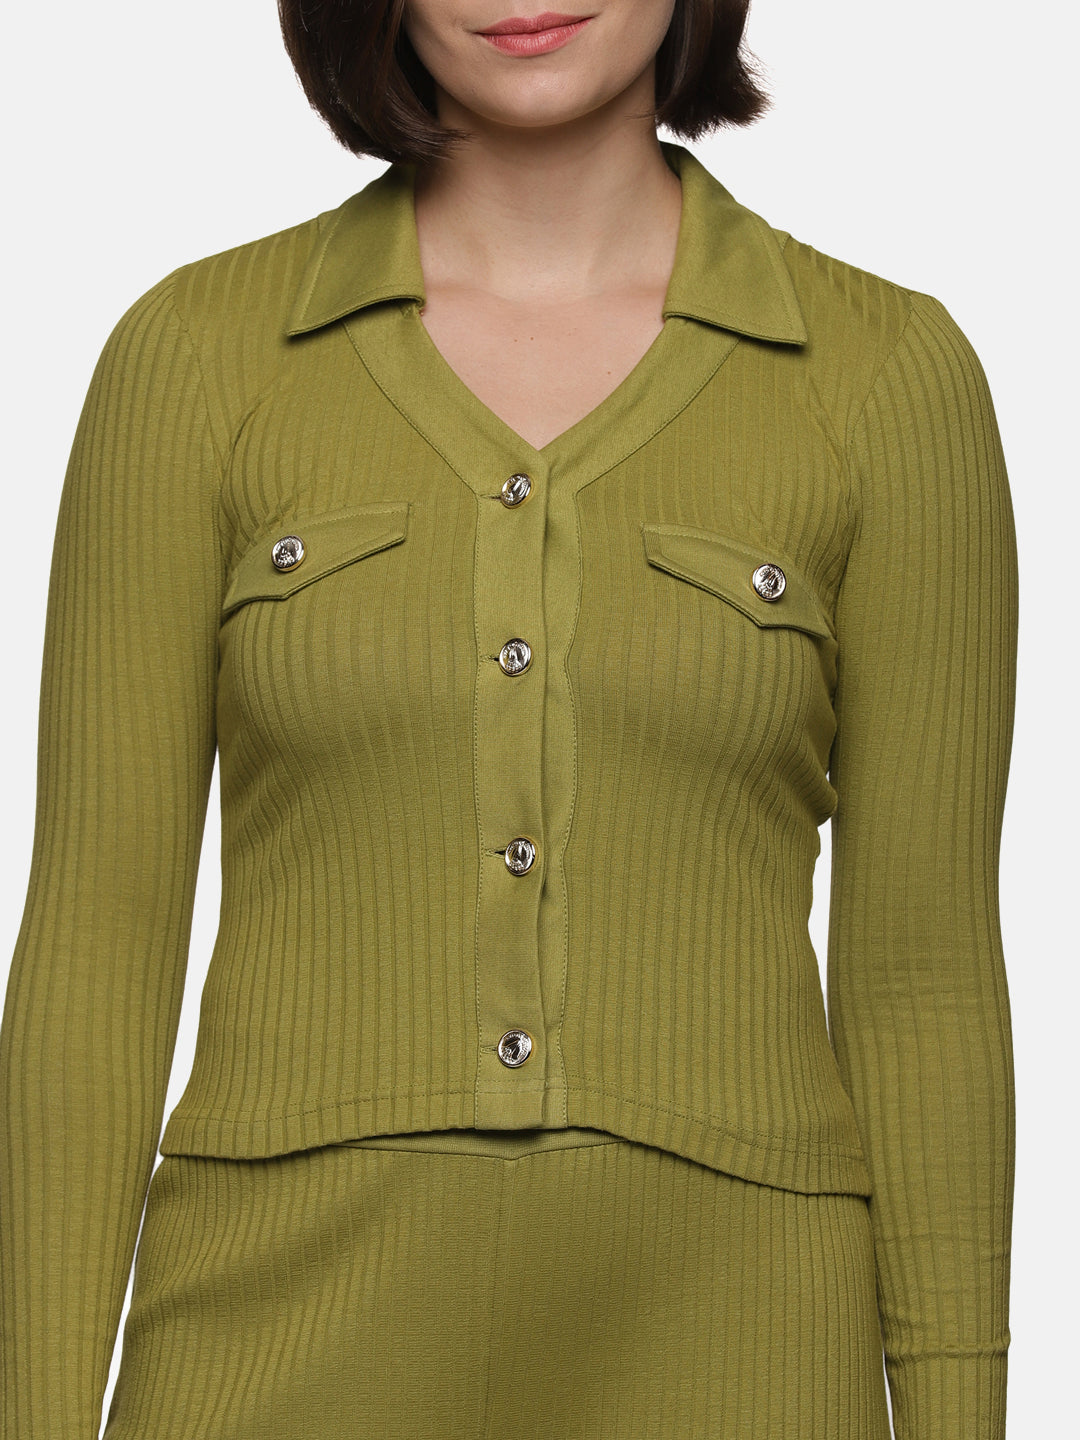 IS.U Green Olive Collared V-neck Rib Top